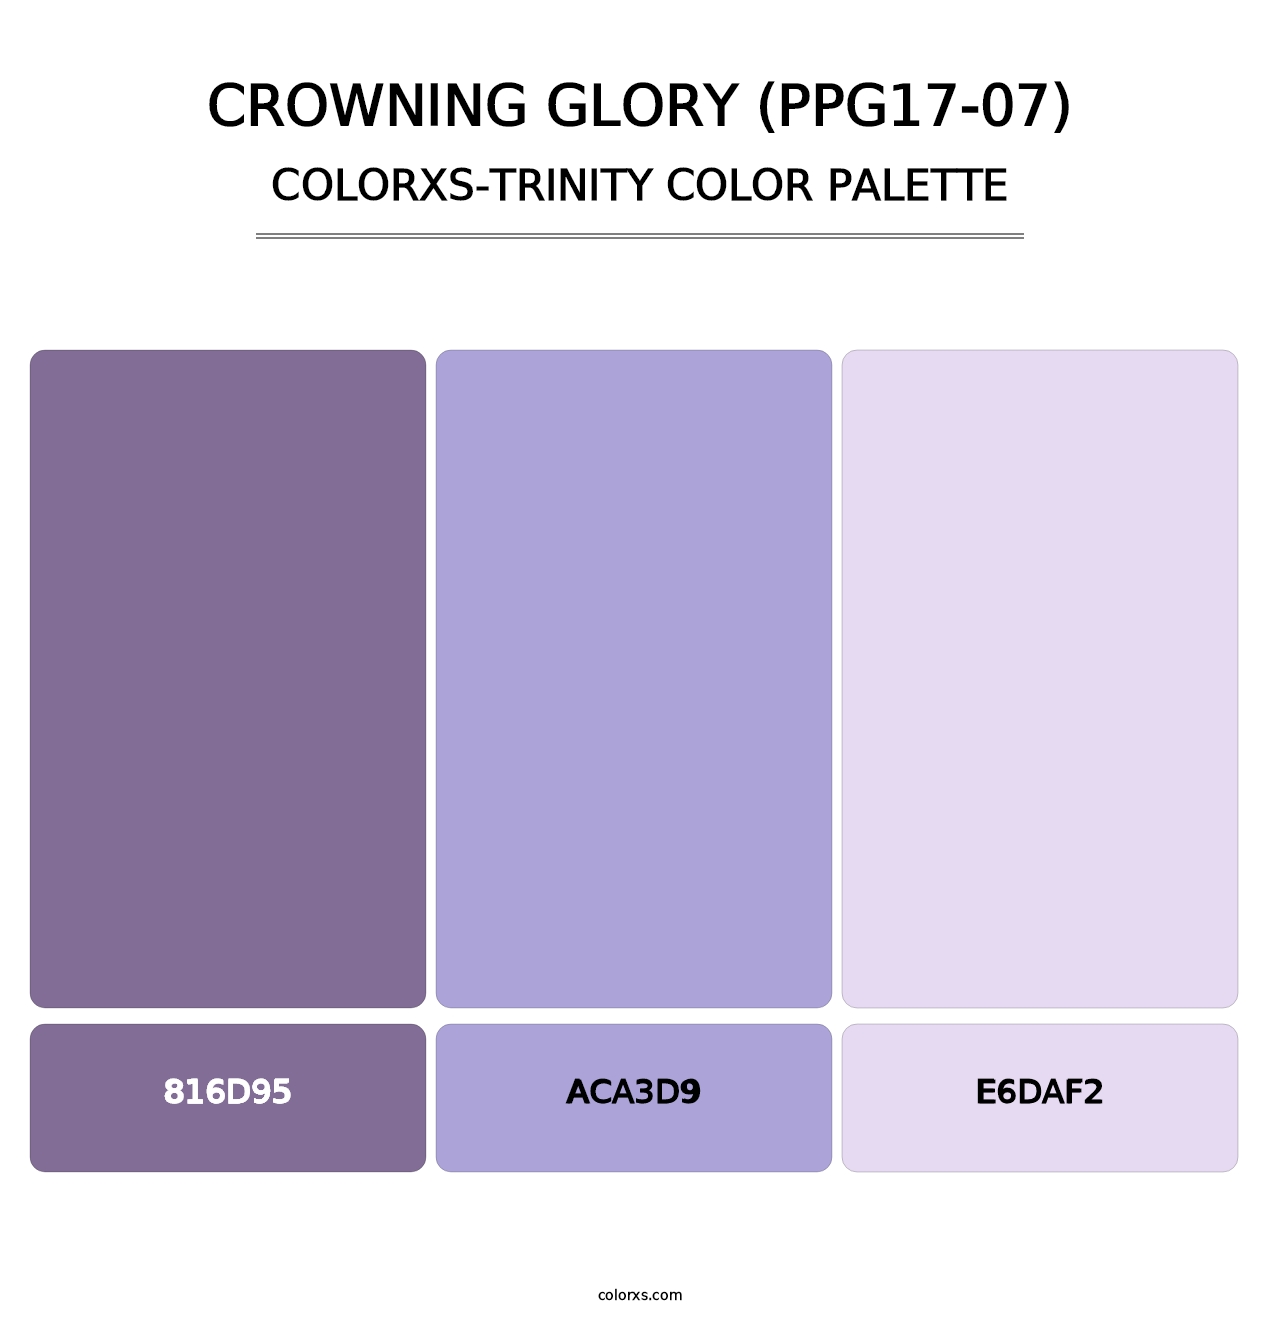 Crowning Glory (PPG17-07) - Colorxs Trinity Palette